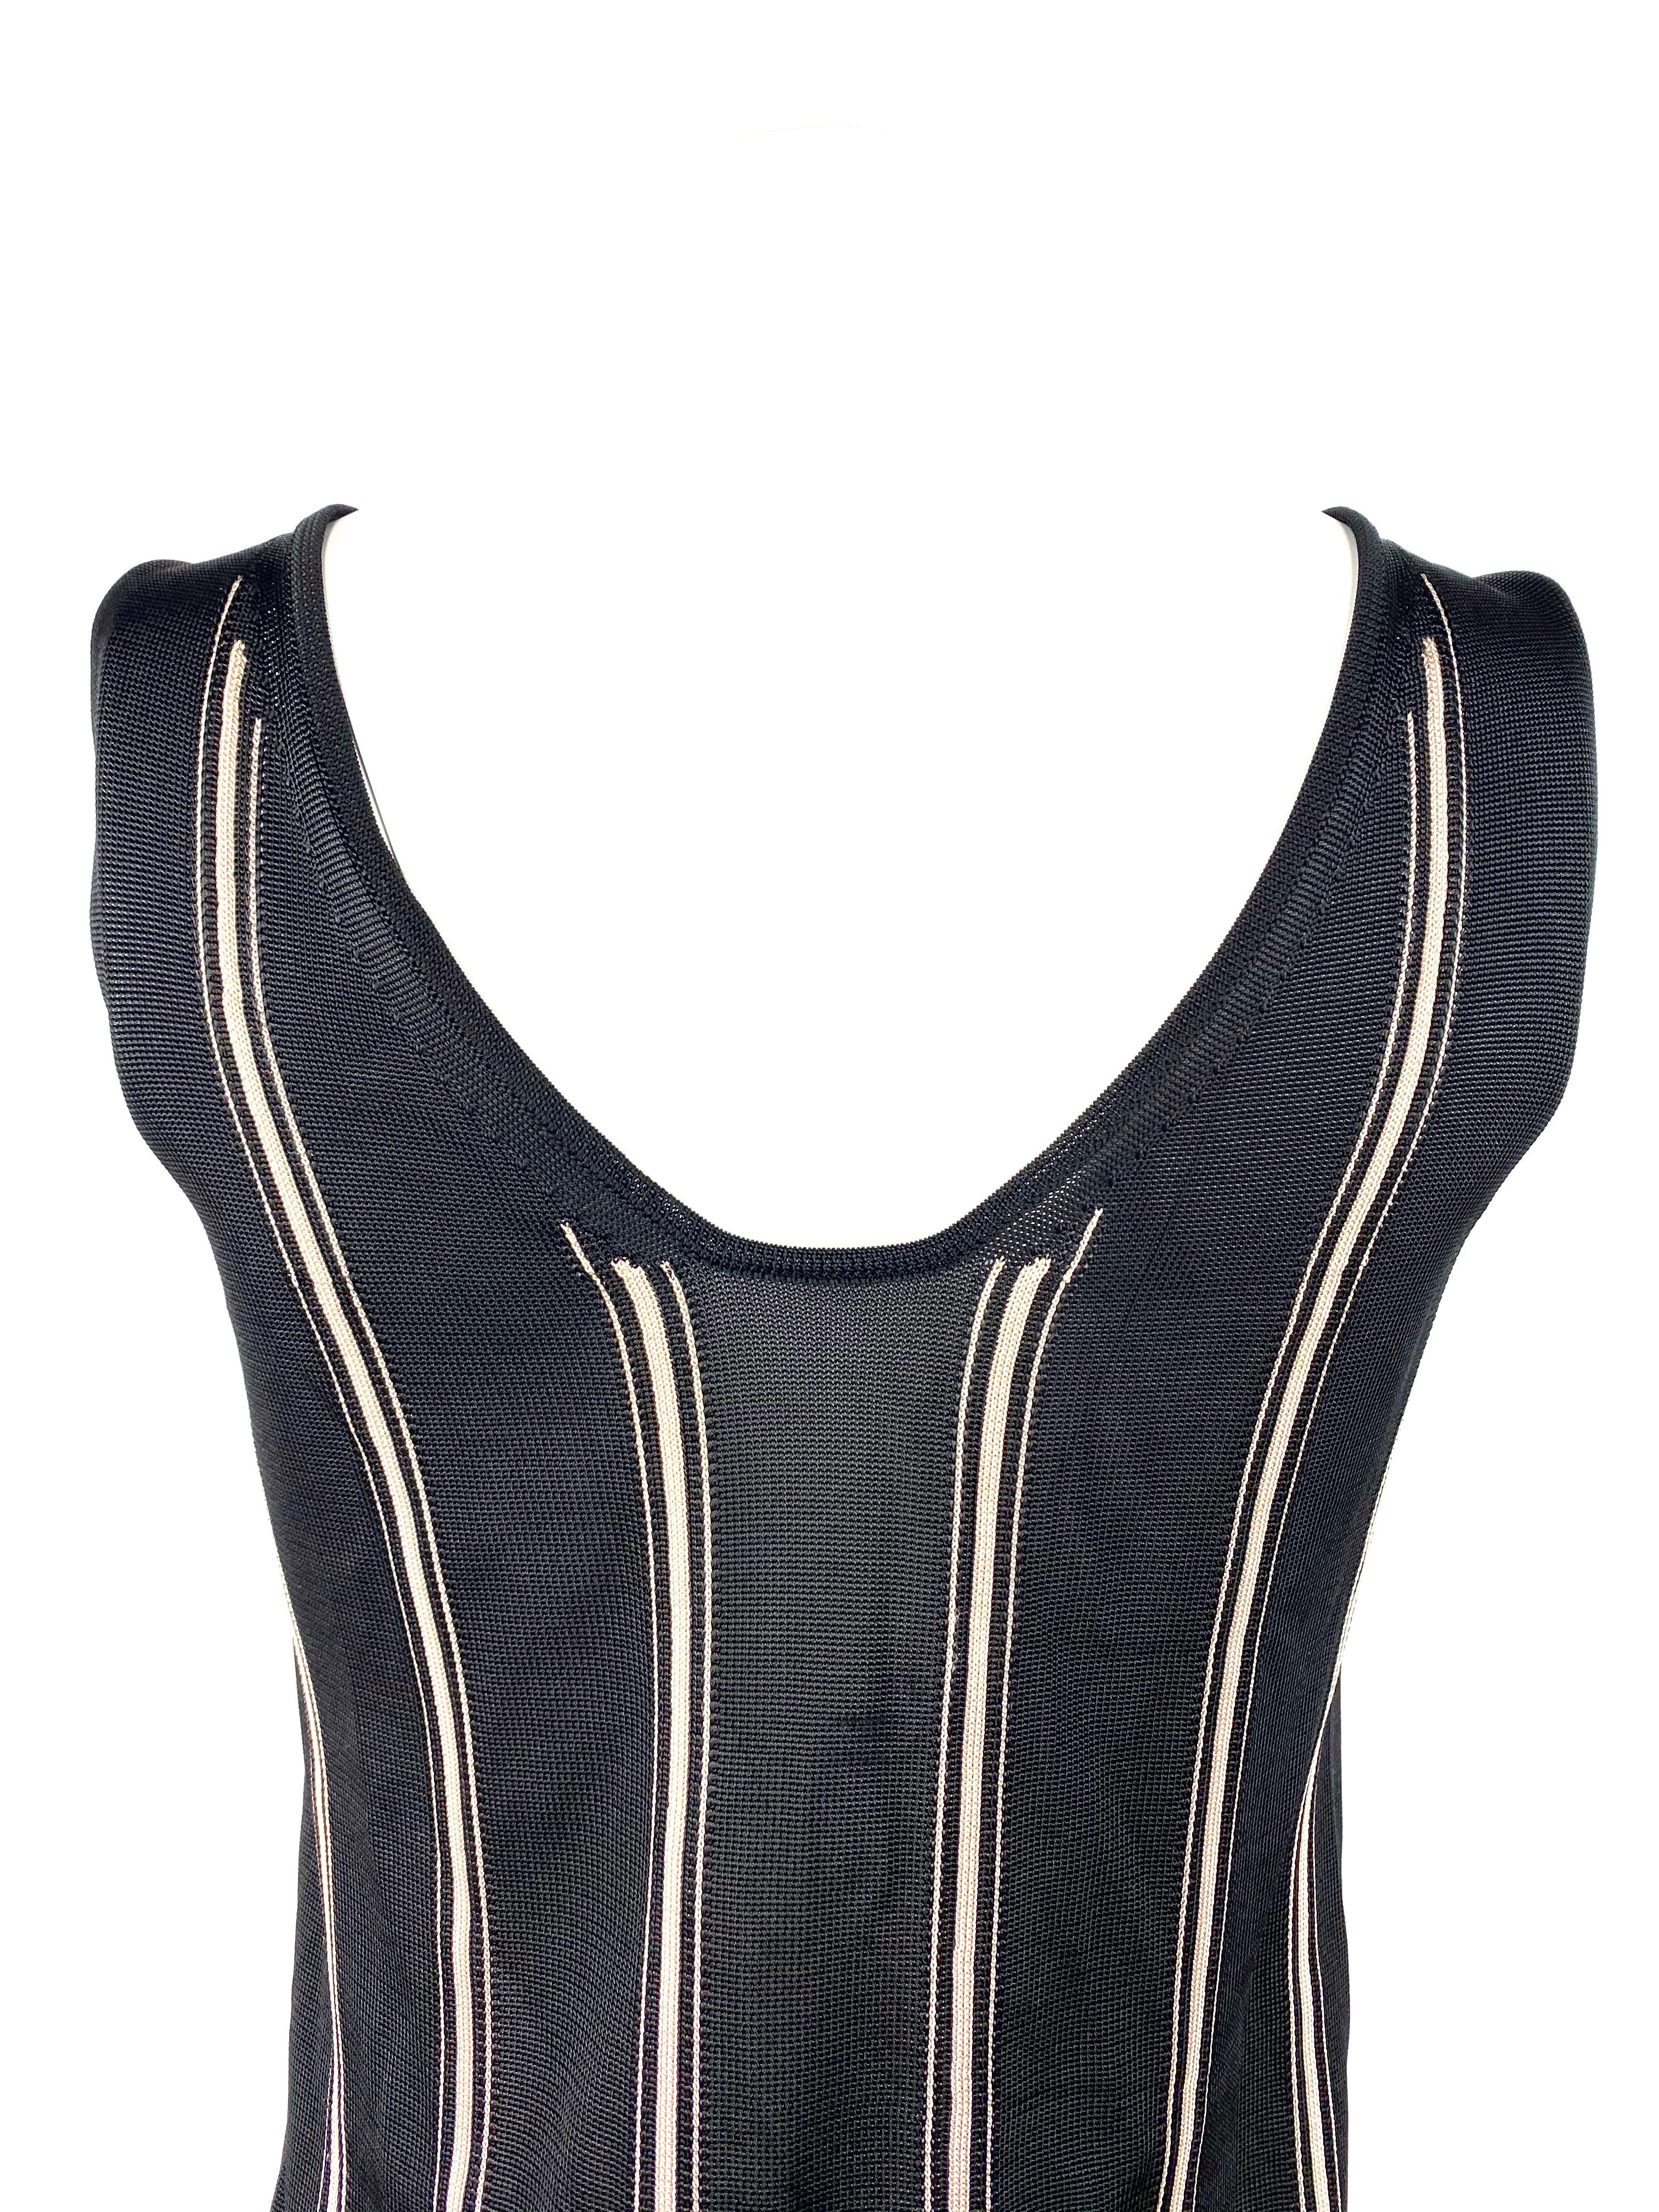 Lanvin Paris Black and White Striped Knit Sleeveles Top  In Excellent Condition For Sale In Beverly Hills, CA